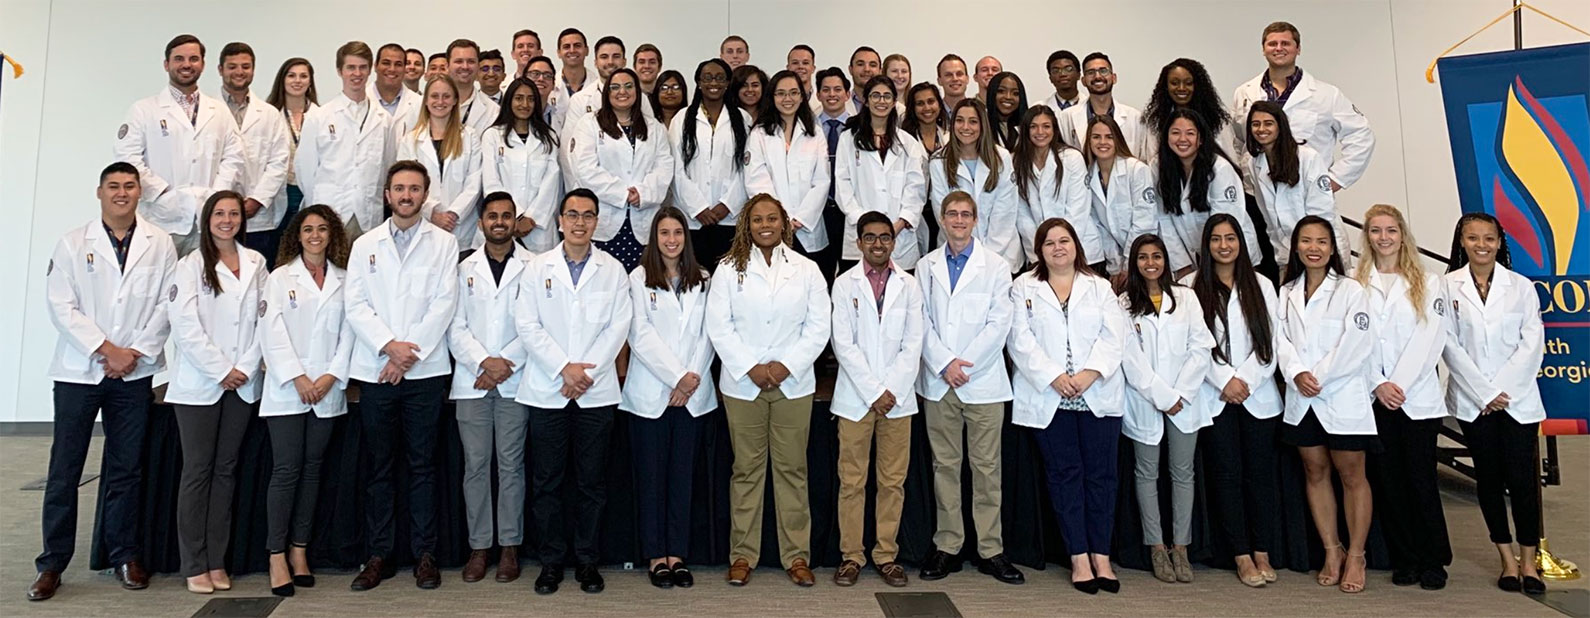 PCOM South Georgia Class of 2023 during the white coat ceremony in 2019.